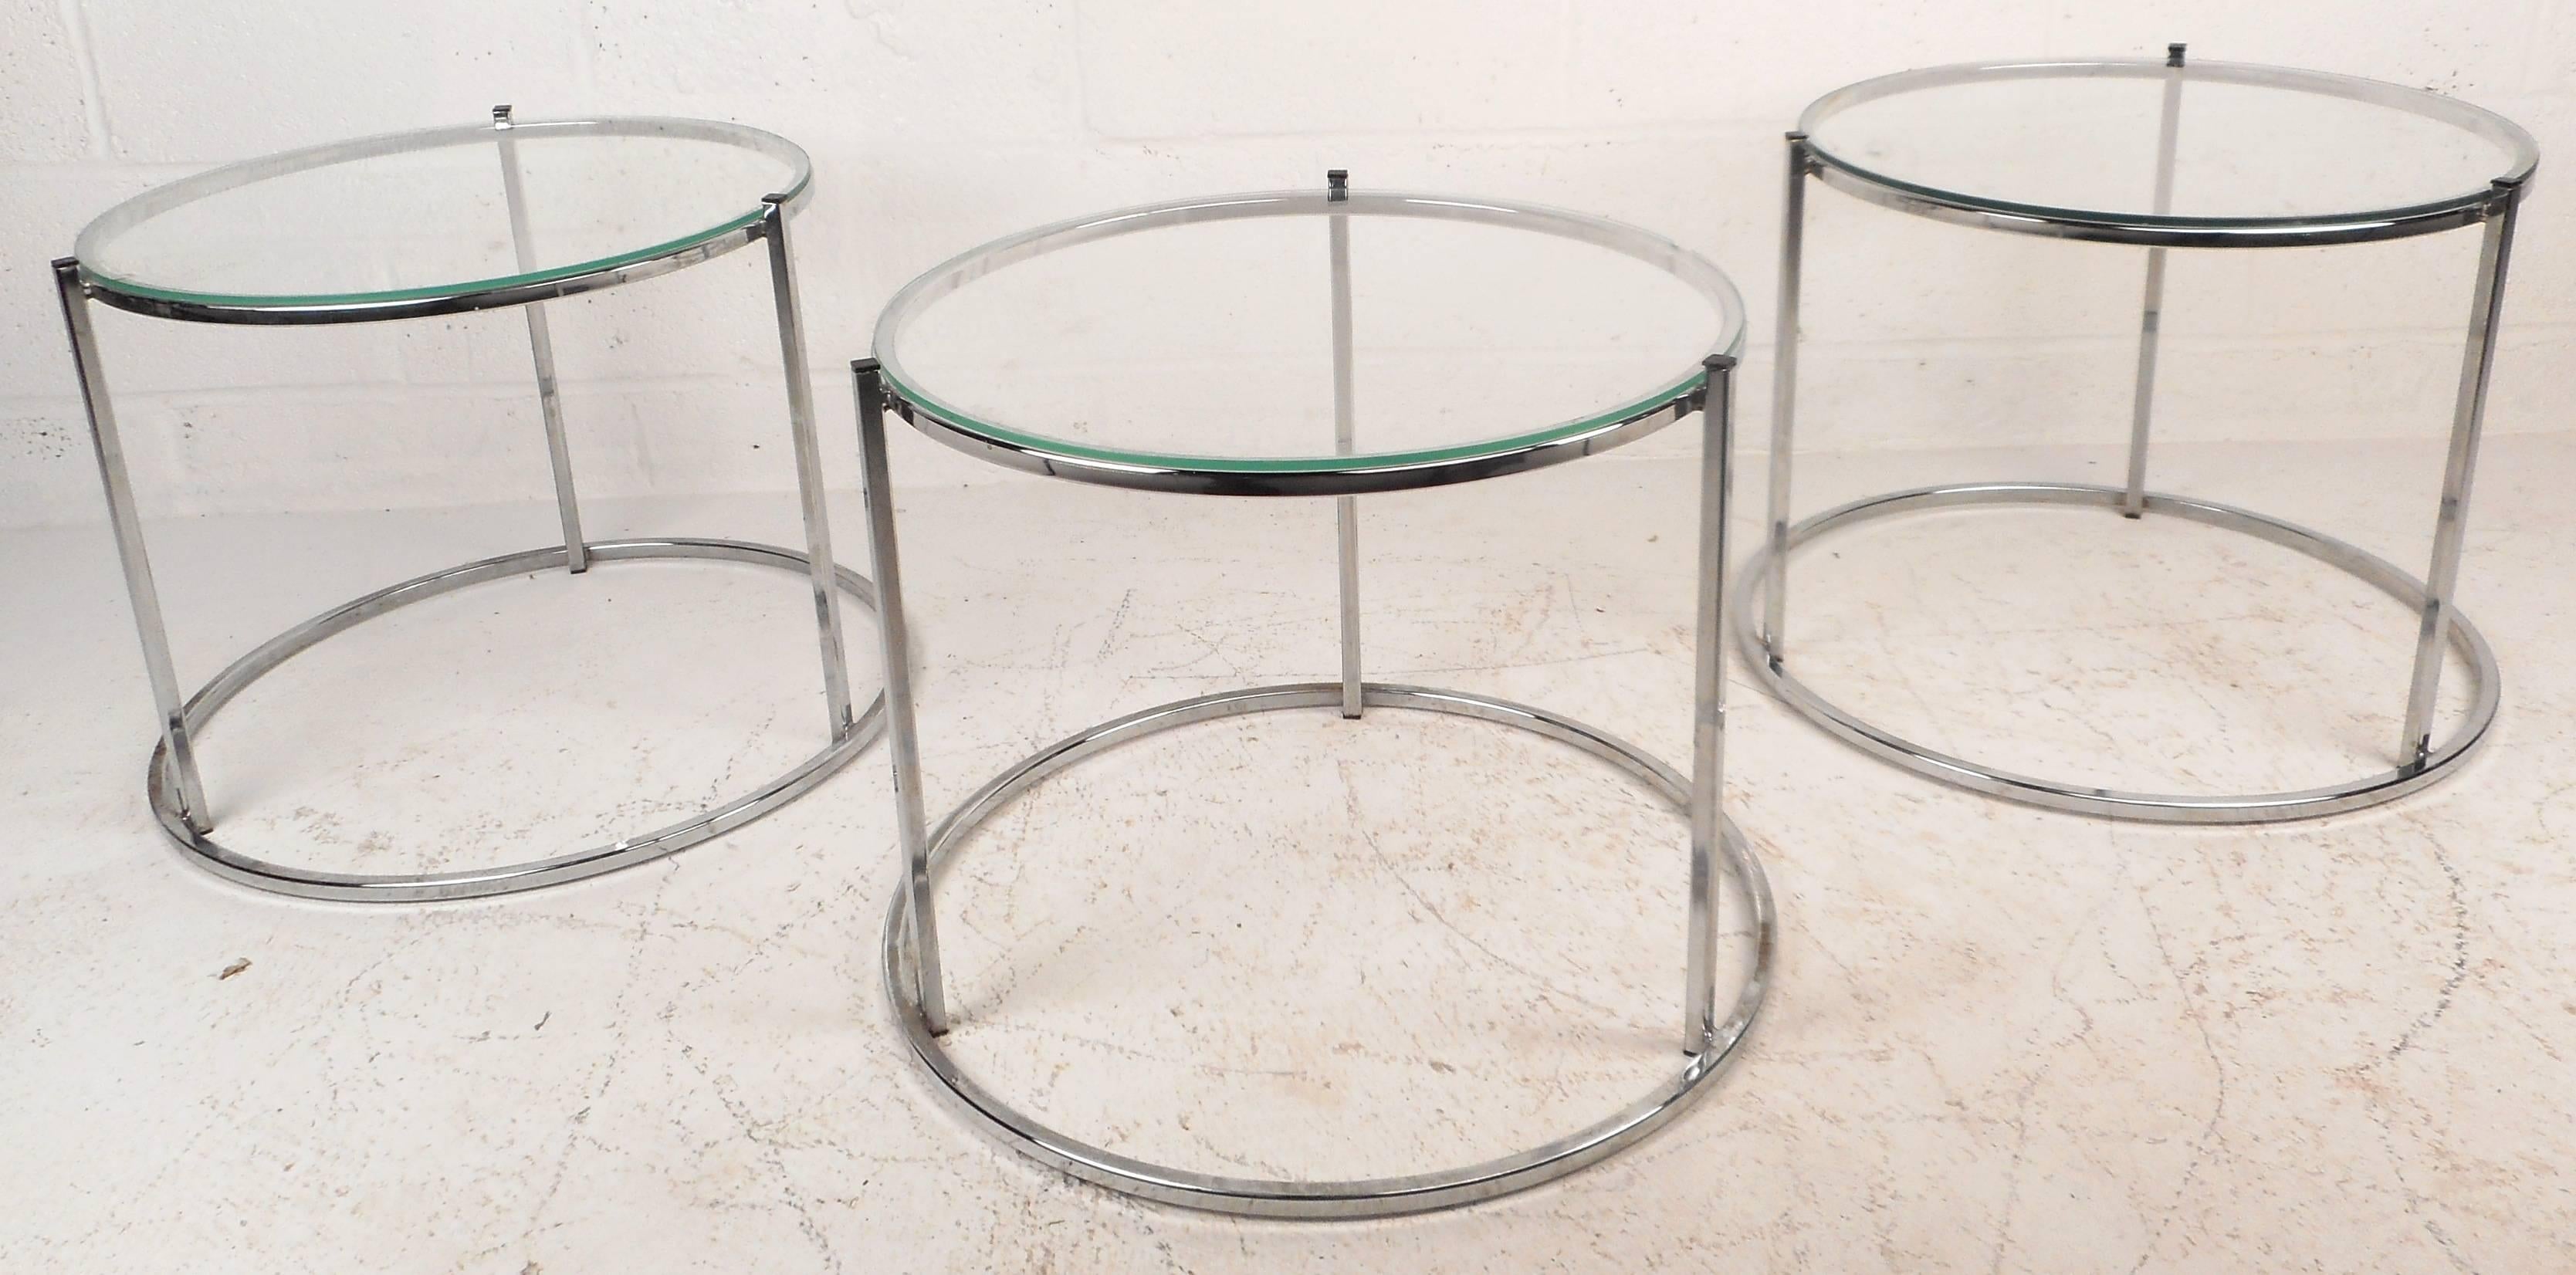 American Mid-Century Modern Chrome and Glass Nesting Tables in the Style of Milo Baughman